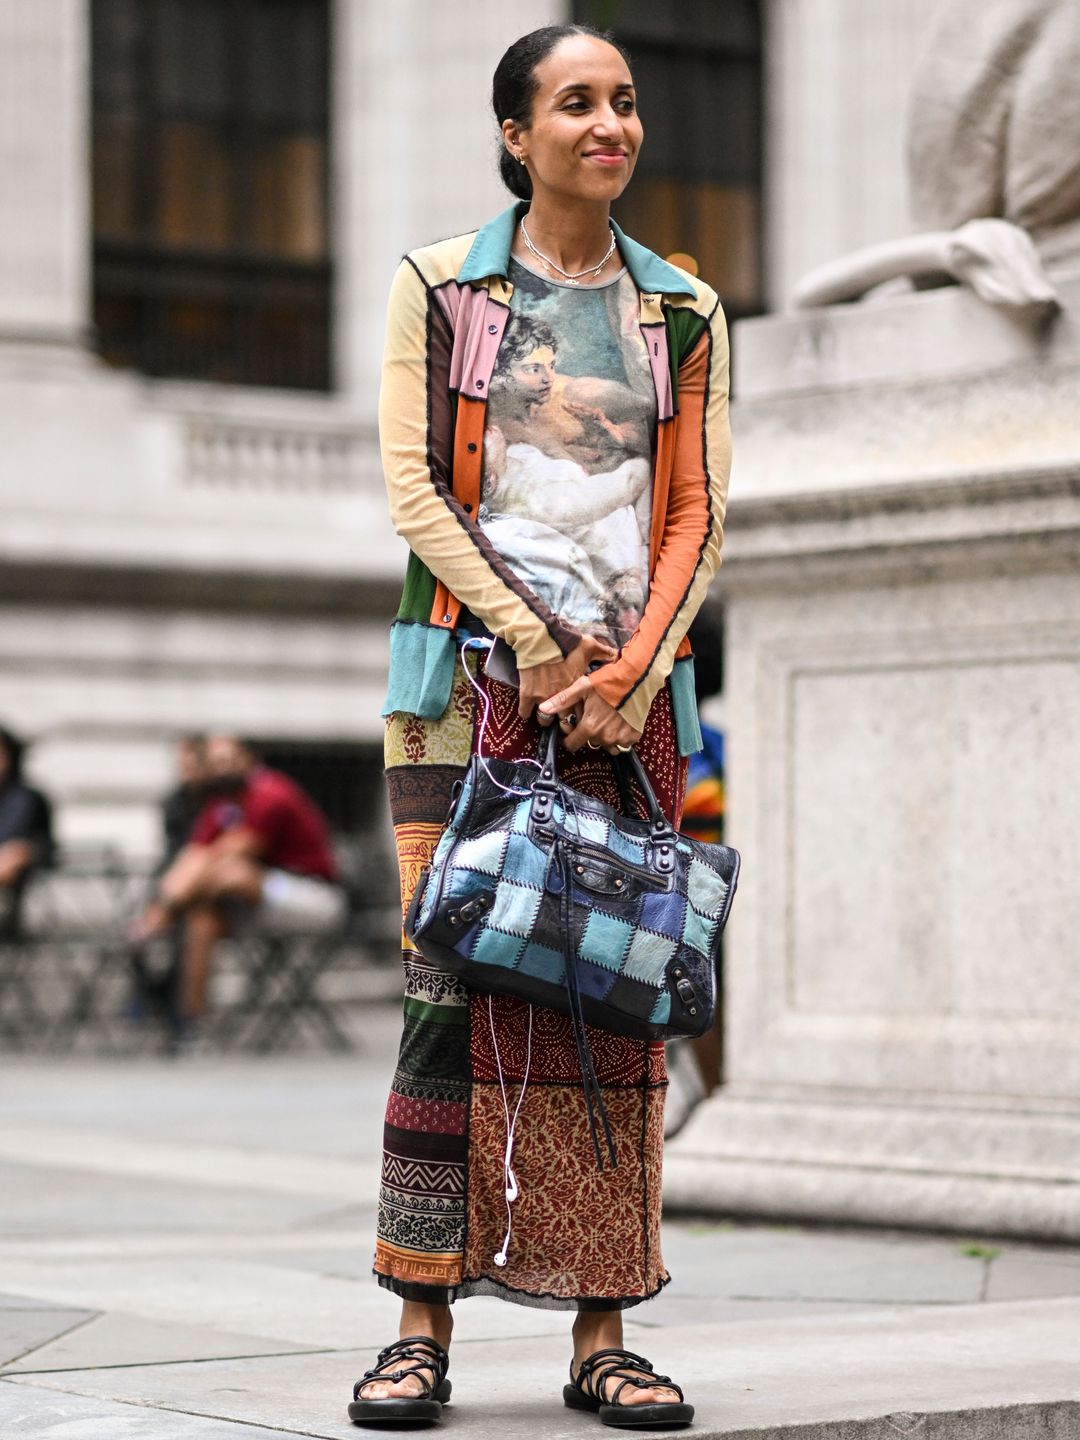 Chioma Nnadi outside the Marc Jacobs show in New York